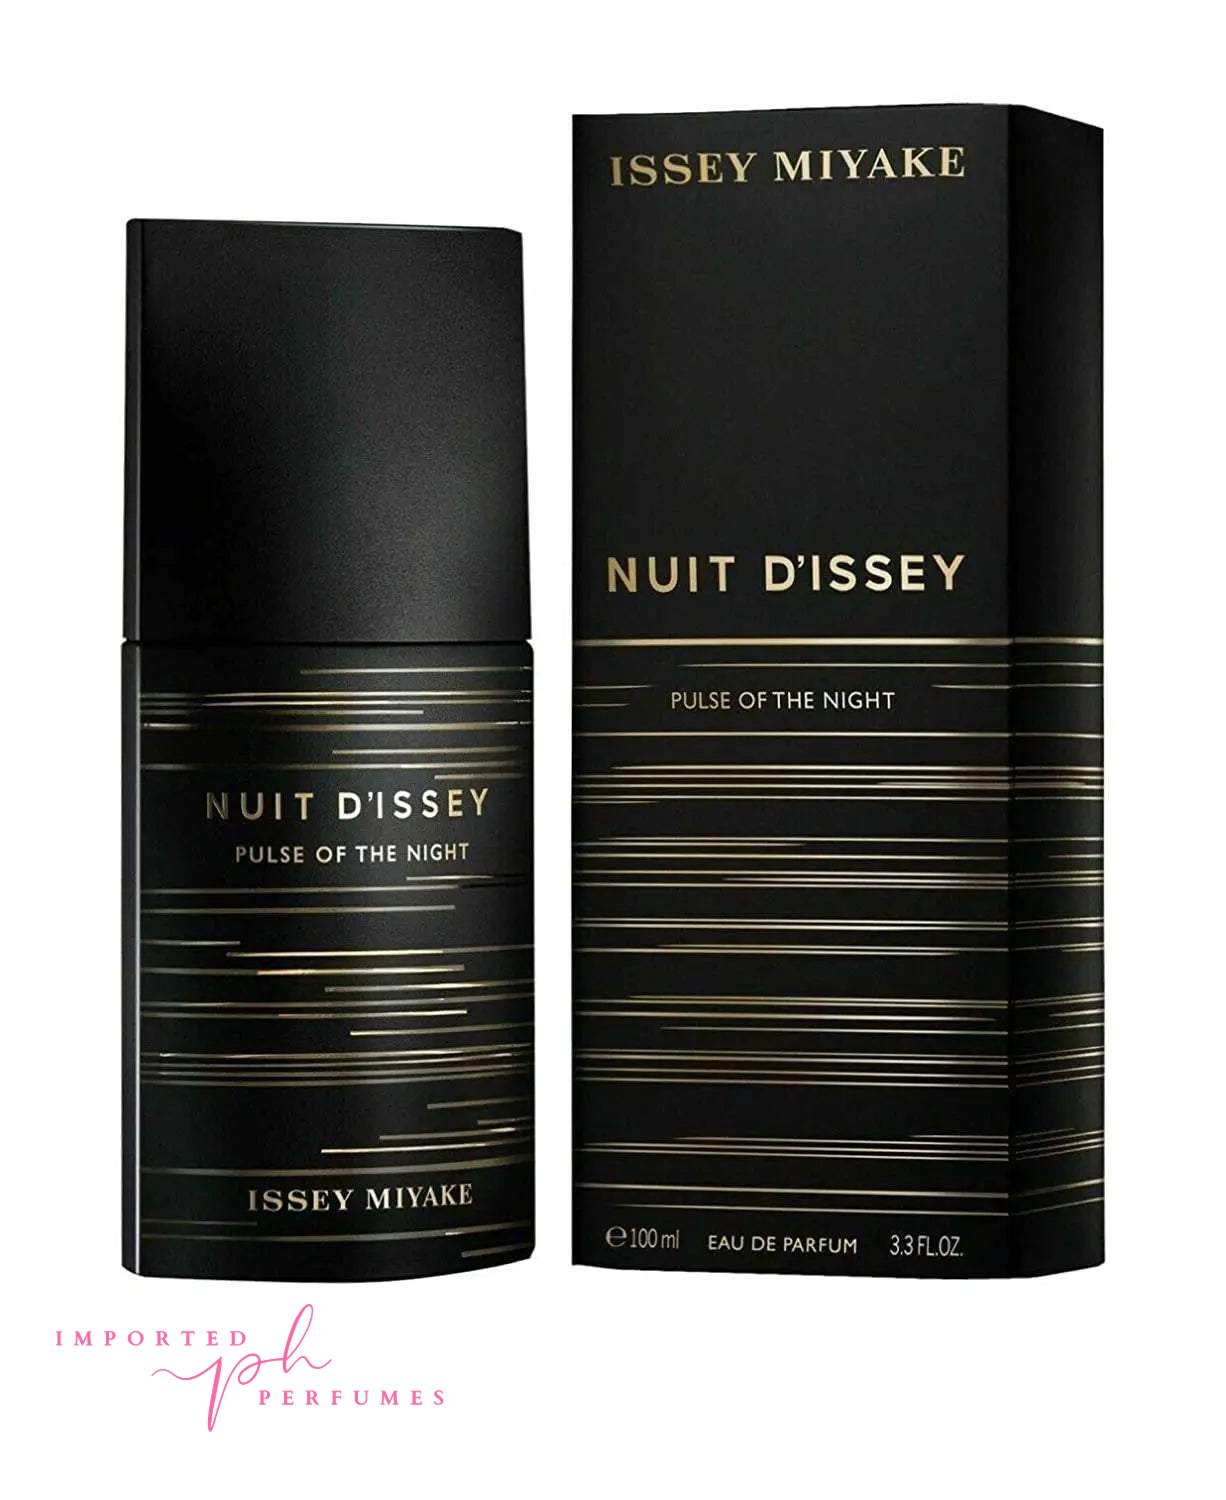 Issey Miyake Nuit D'issey Pulse of The Night Eau De Parfum 100ml Men-Imported Perfumes Co-For Men,Issey Miyake,men,Mens perfume,Night,Nuit,Pulse